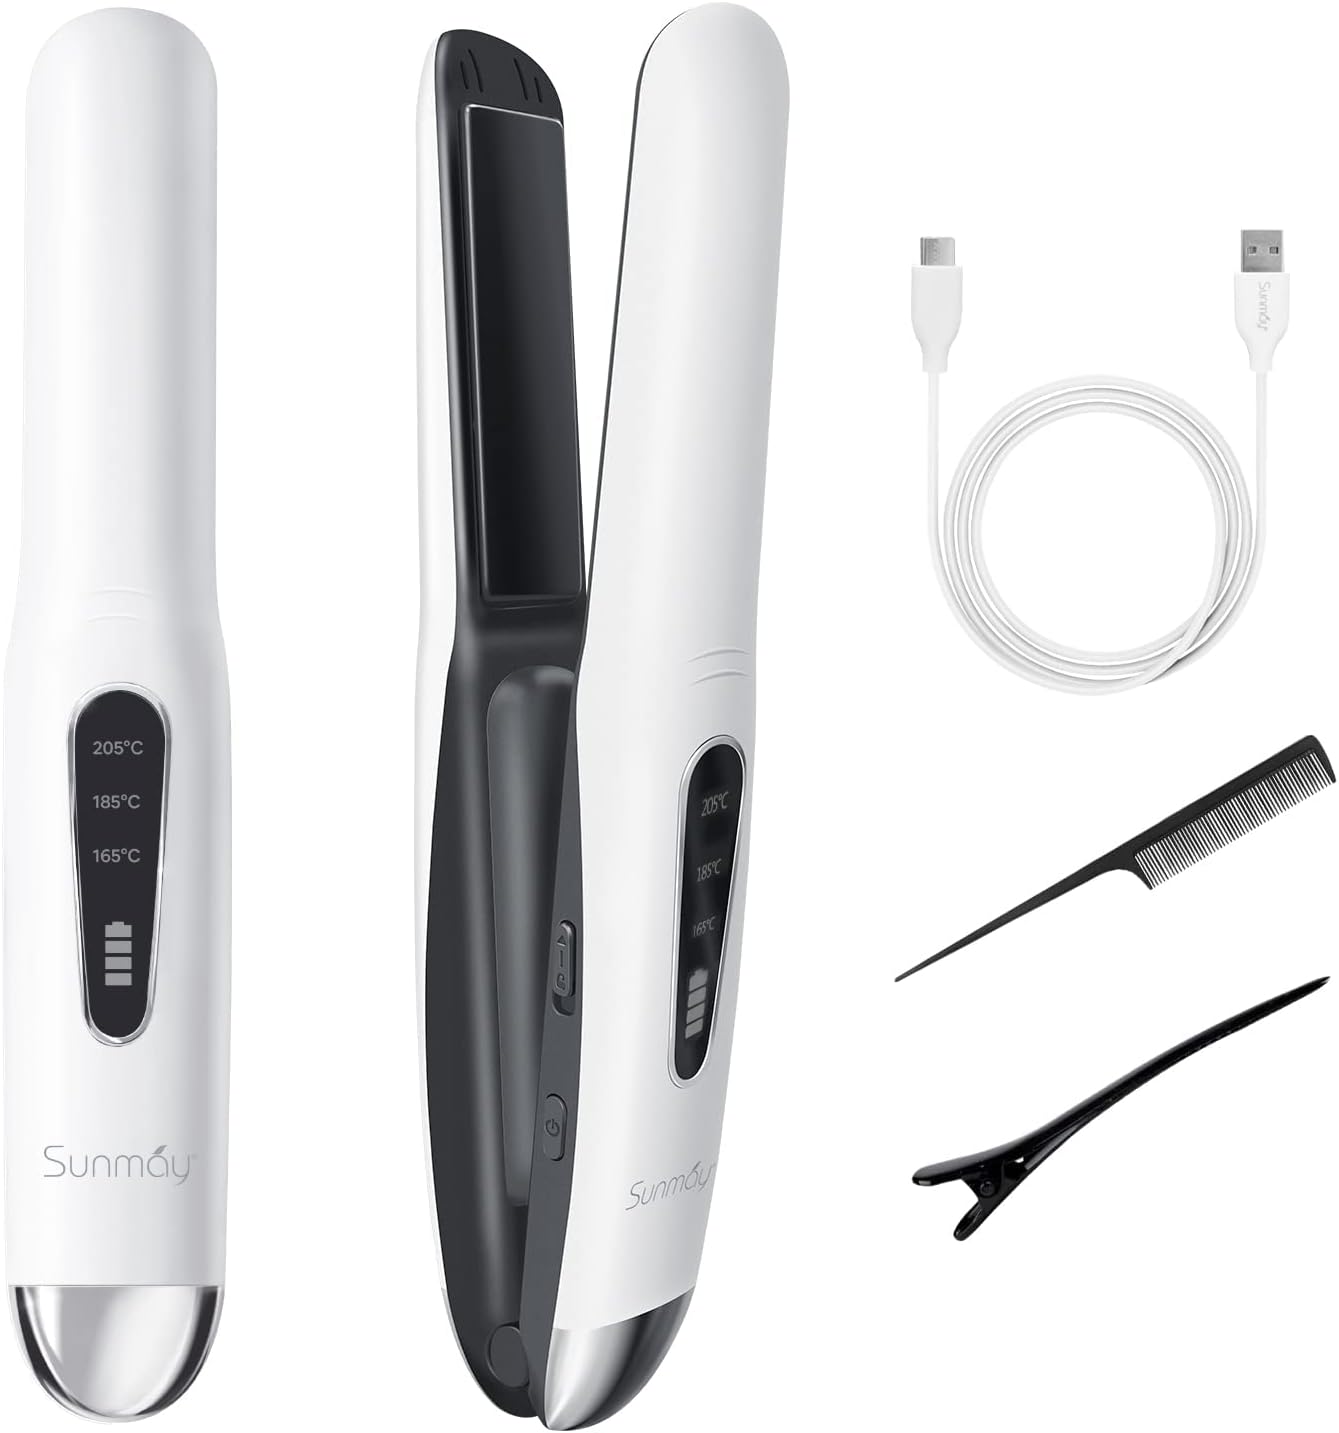 Sunmay Voga Cordless Hair Straightener and Curler 2 in [...]